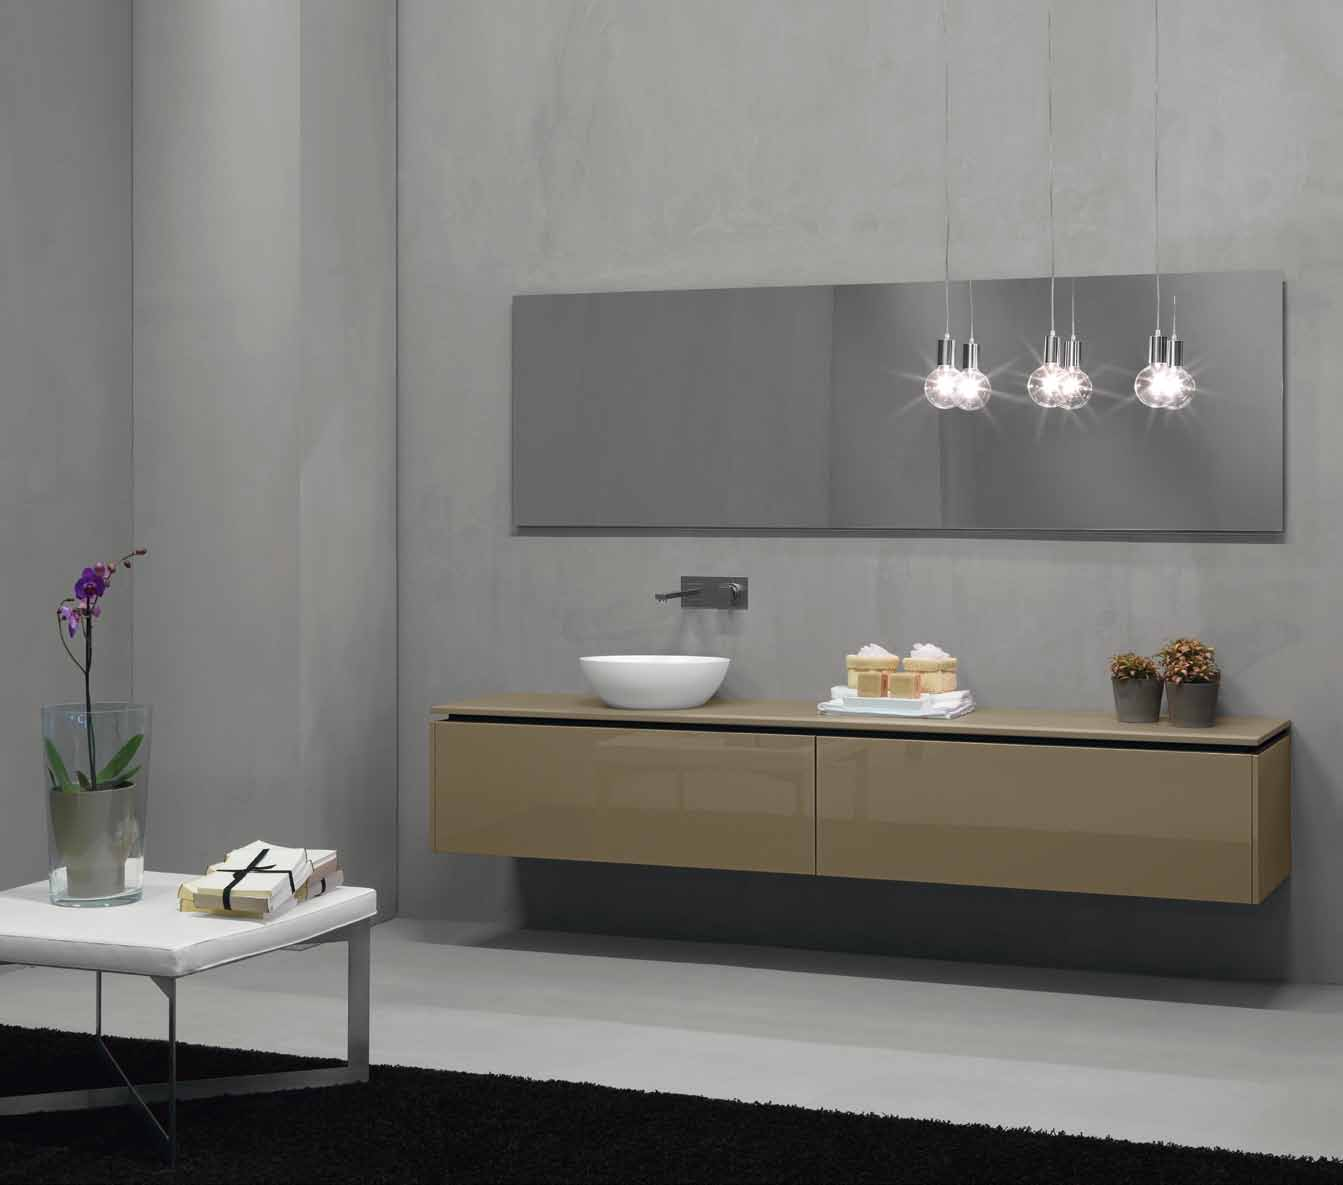 K.FORTY clay glossy lacquered, washbasin BOWL hi-macs, mirror 2HD led, lamp EVE chrome, complements SOFT HD polished steel + brushed steel + leather meuble K.